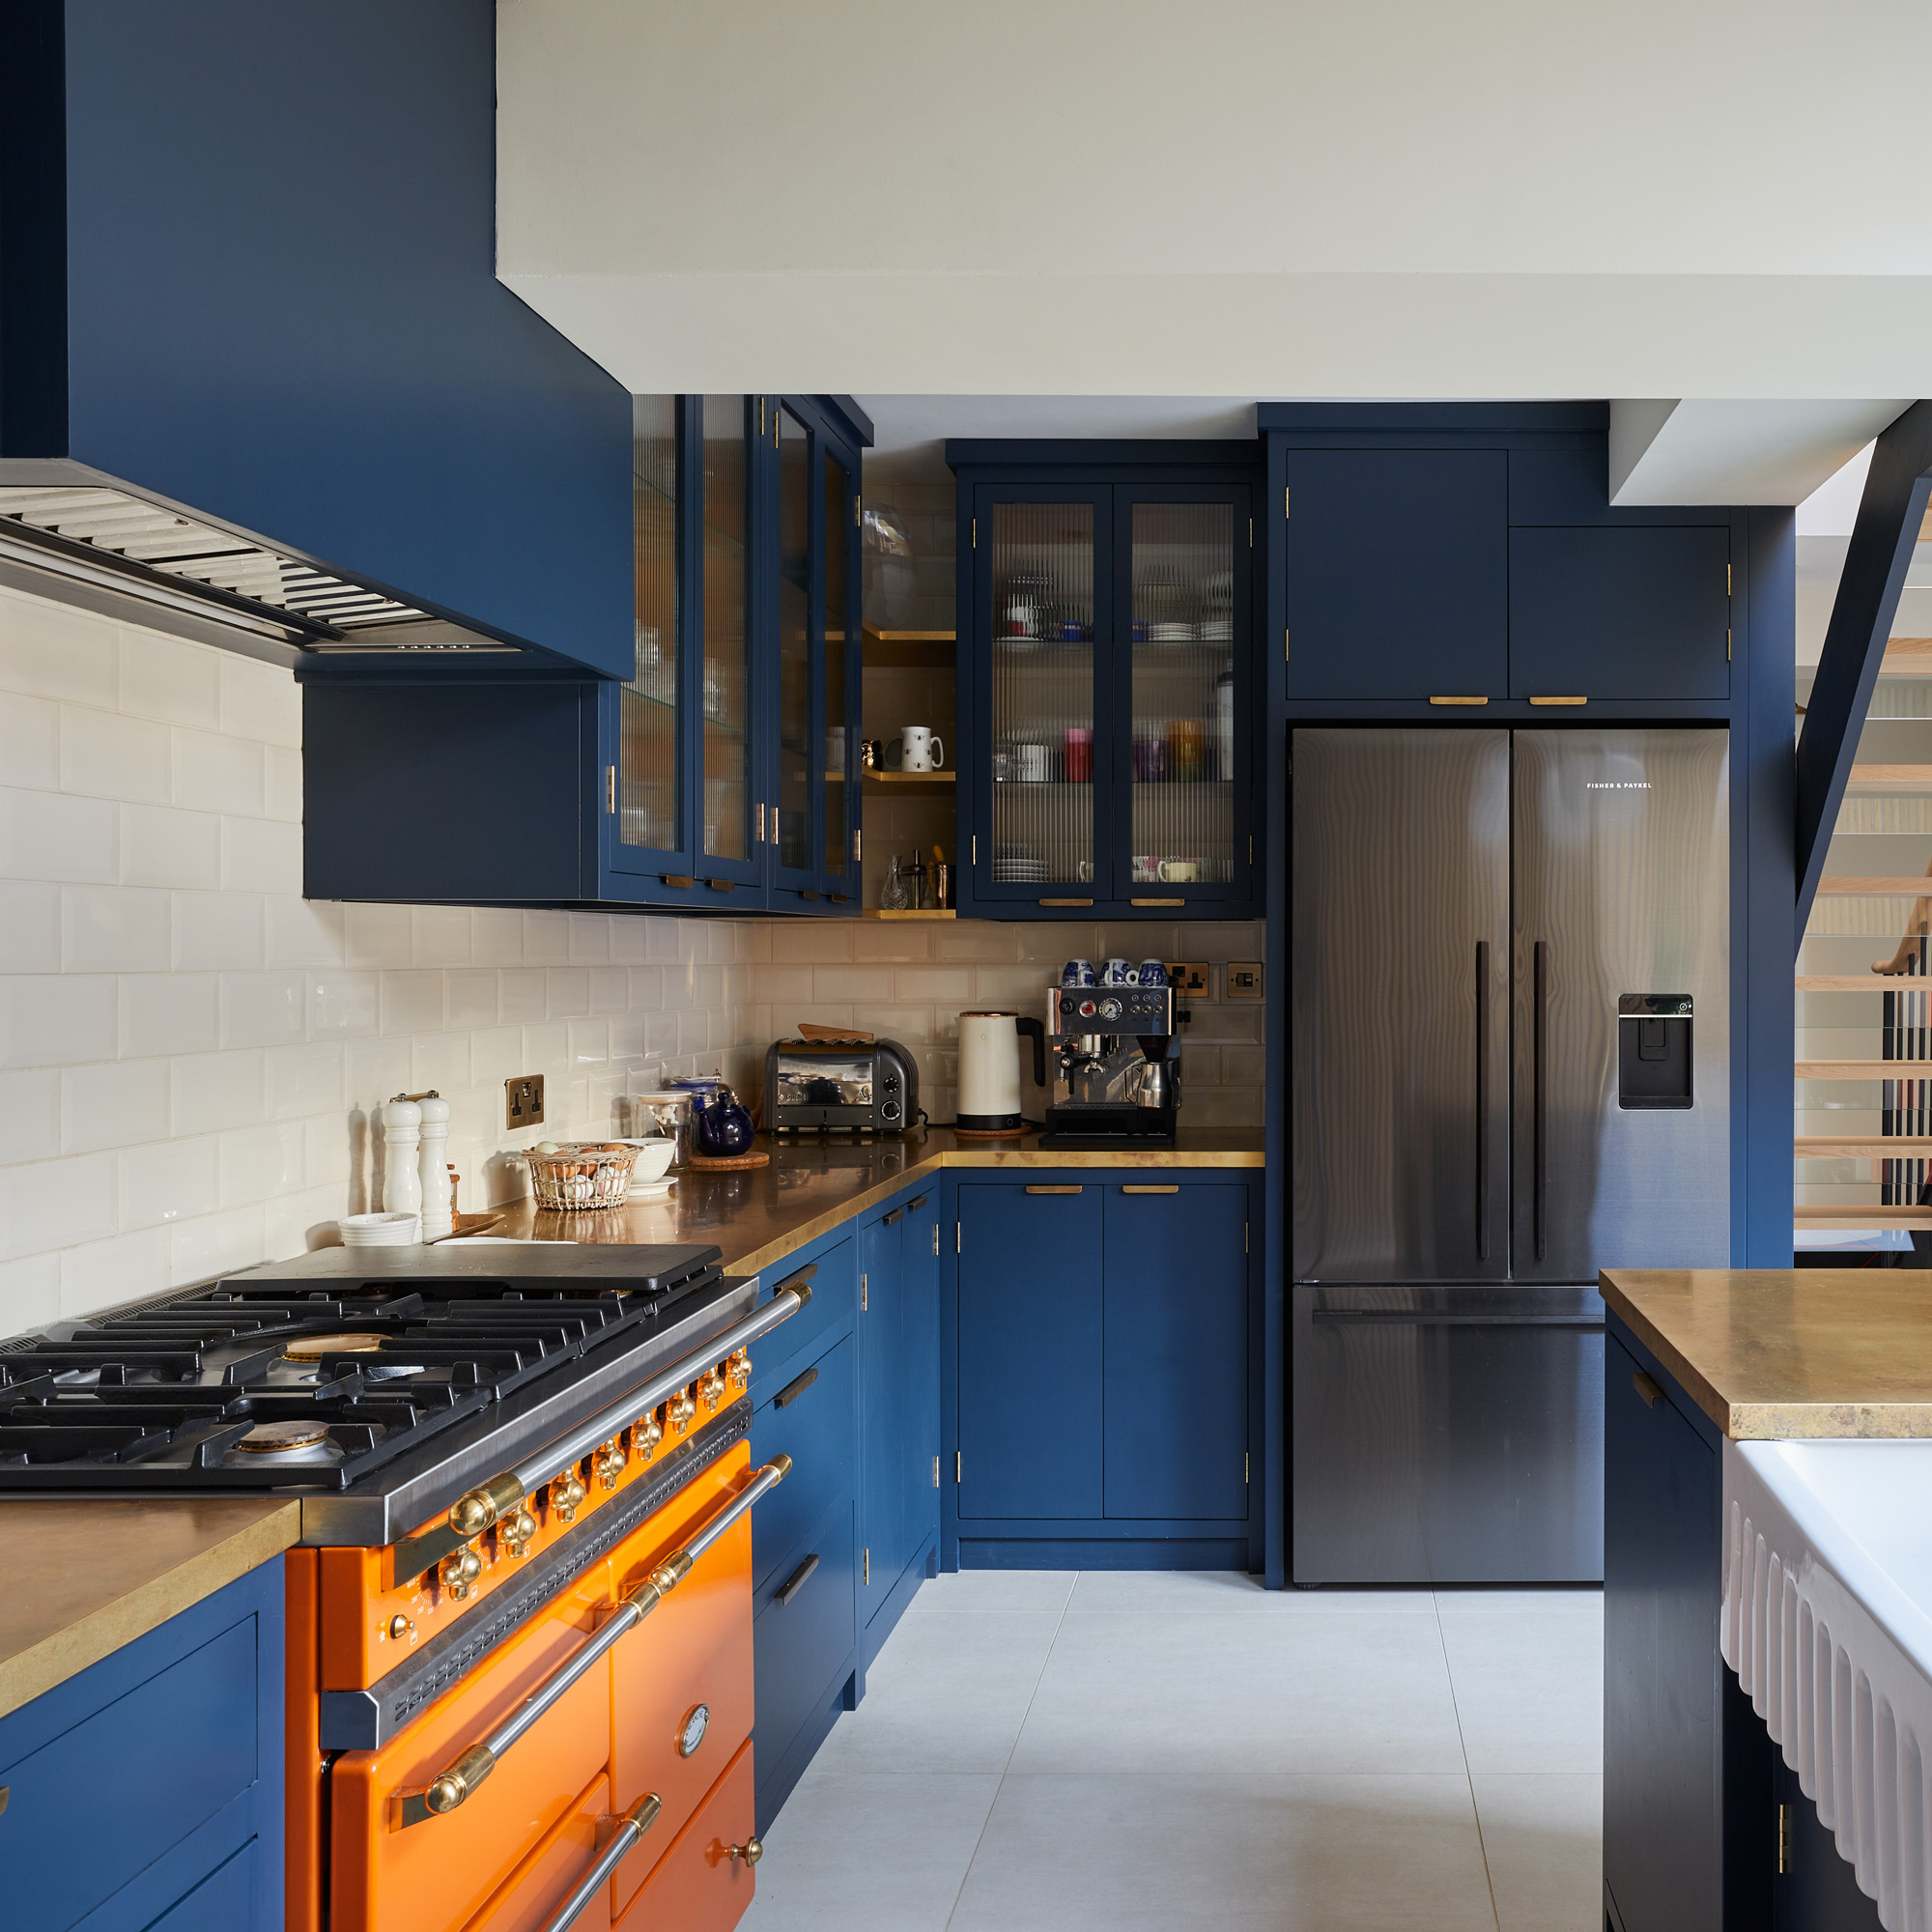 a dark blue kitchen with reeded glass cabinet doors and a bright orange range cooker